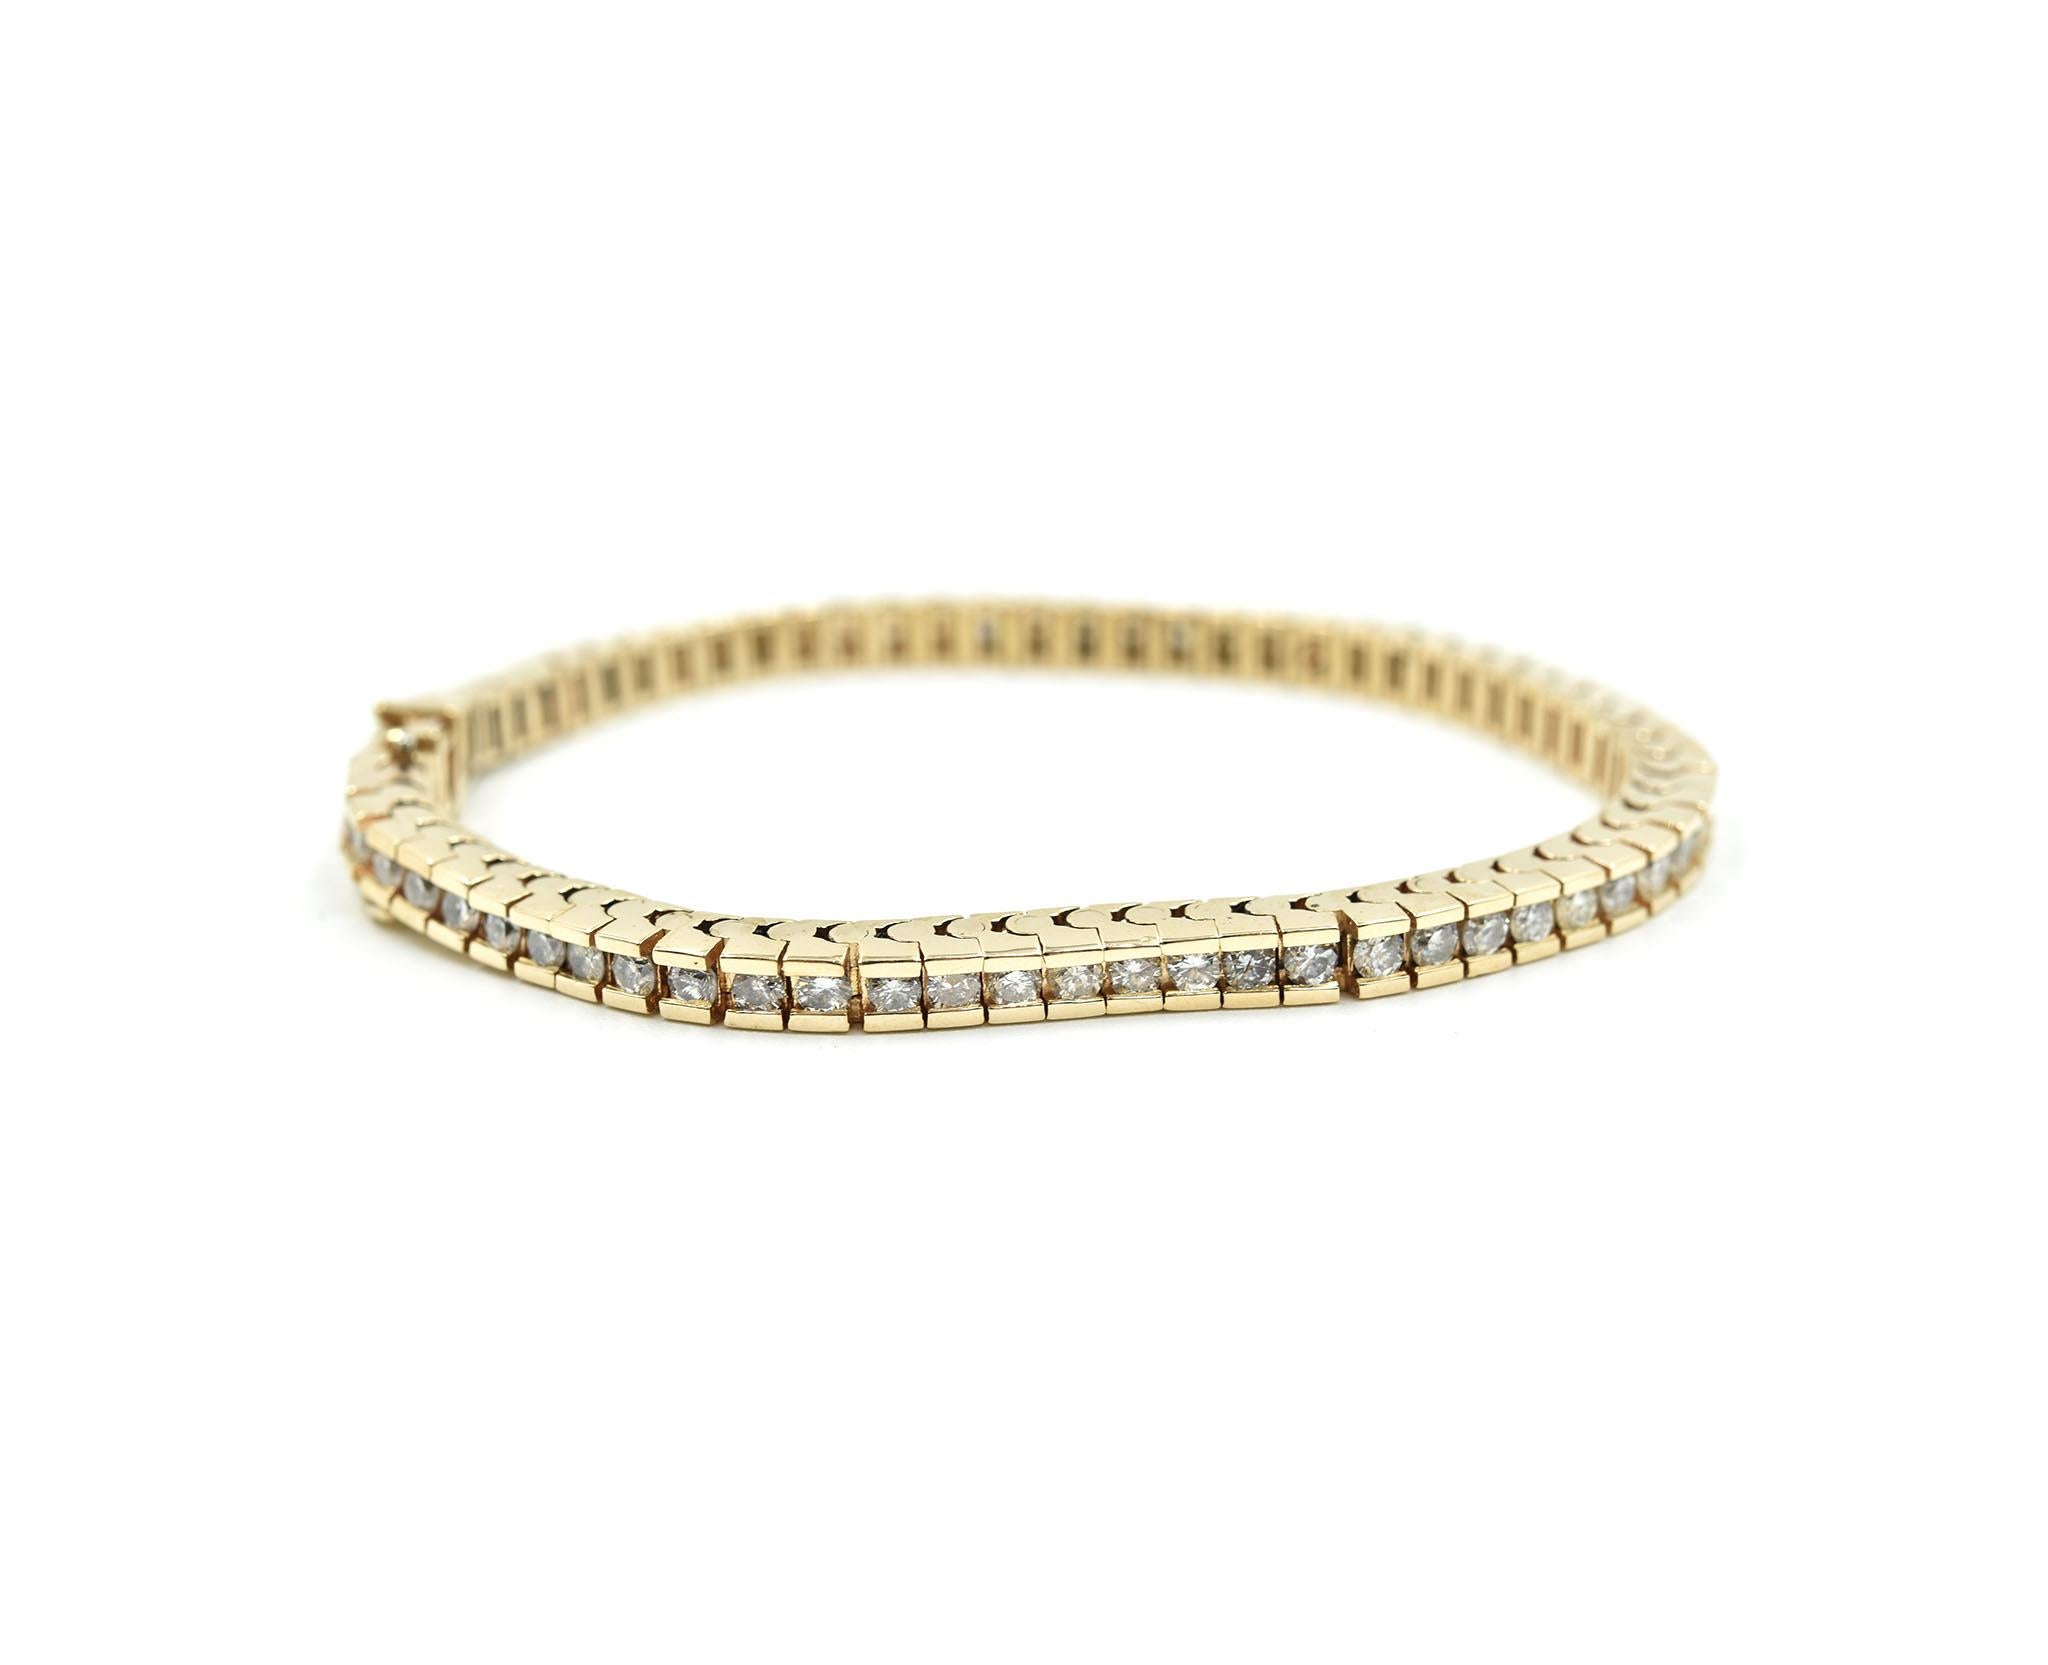 Designer: custom design
Material: 14k yellow gold
Diamonds: 66 round brilliant cuts = 3.96 carat total weight
Color: I
Clarity: SI1
Dimensions: bracelet will fit a 6 3/4-inch wrist
Weight: 20.20 grams
